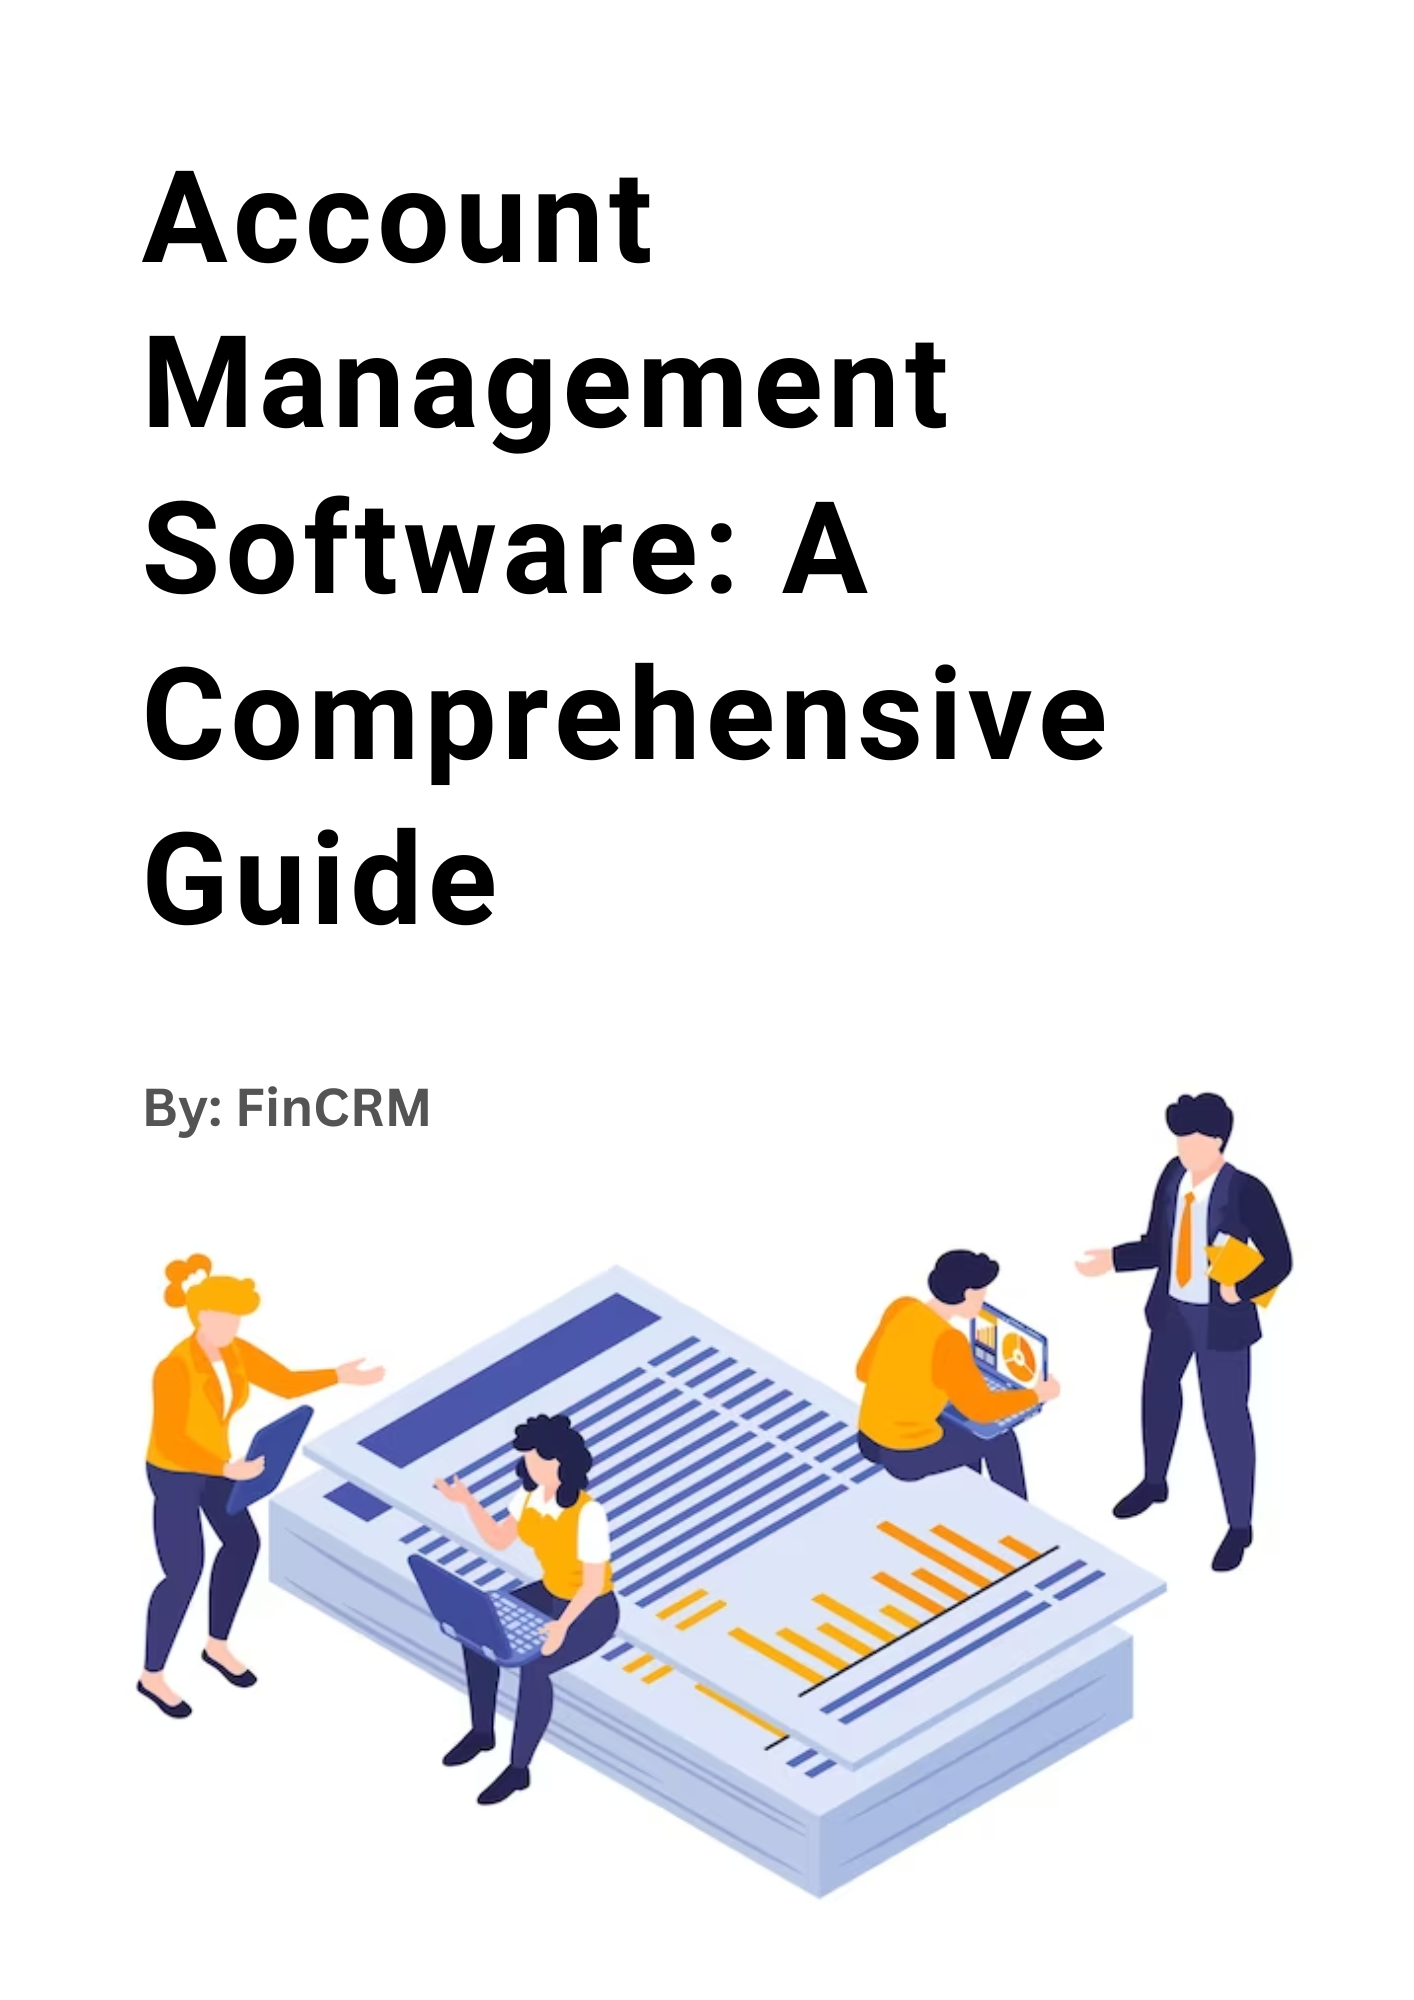 The Ultimate Guide to Account Management Software